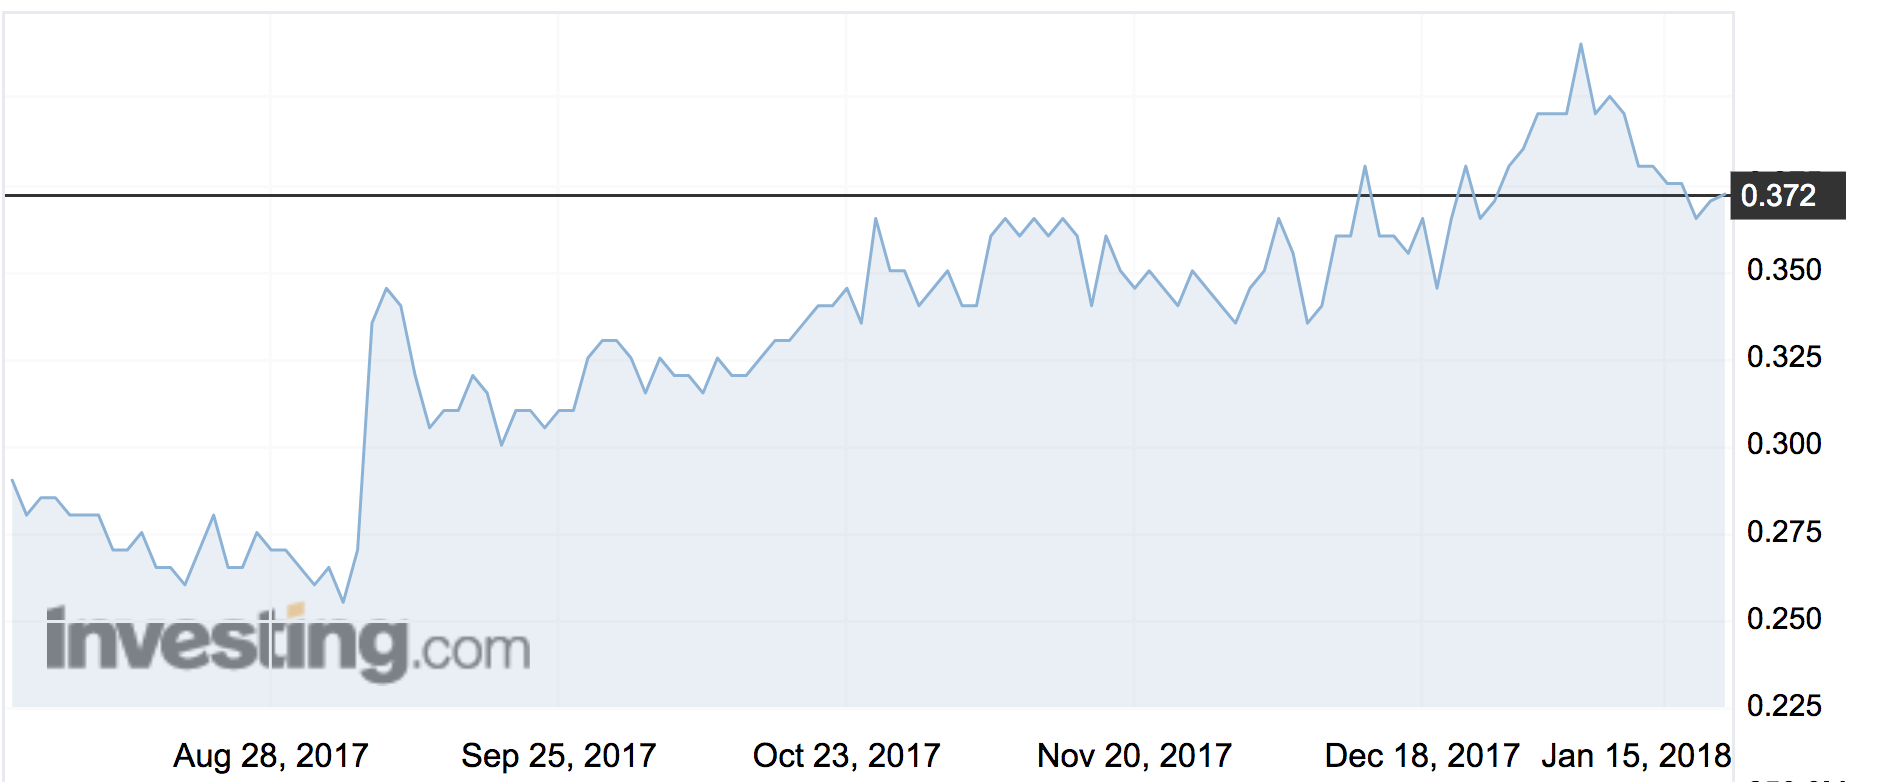 Senex shares over the last five months. Pic: Investing.com